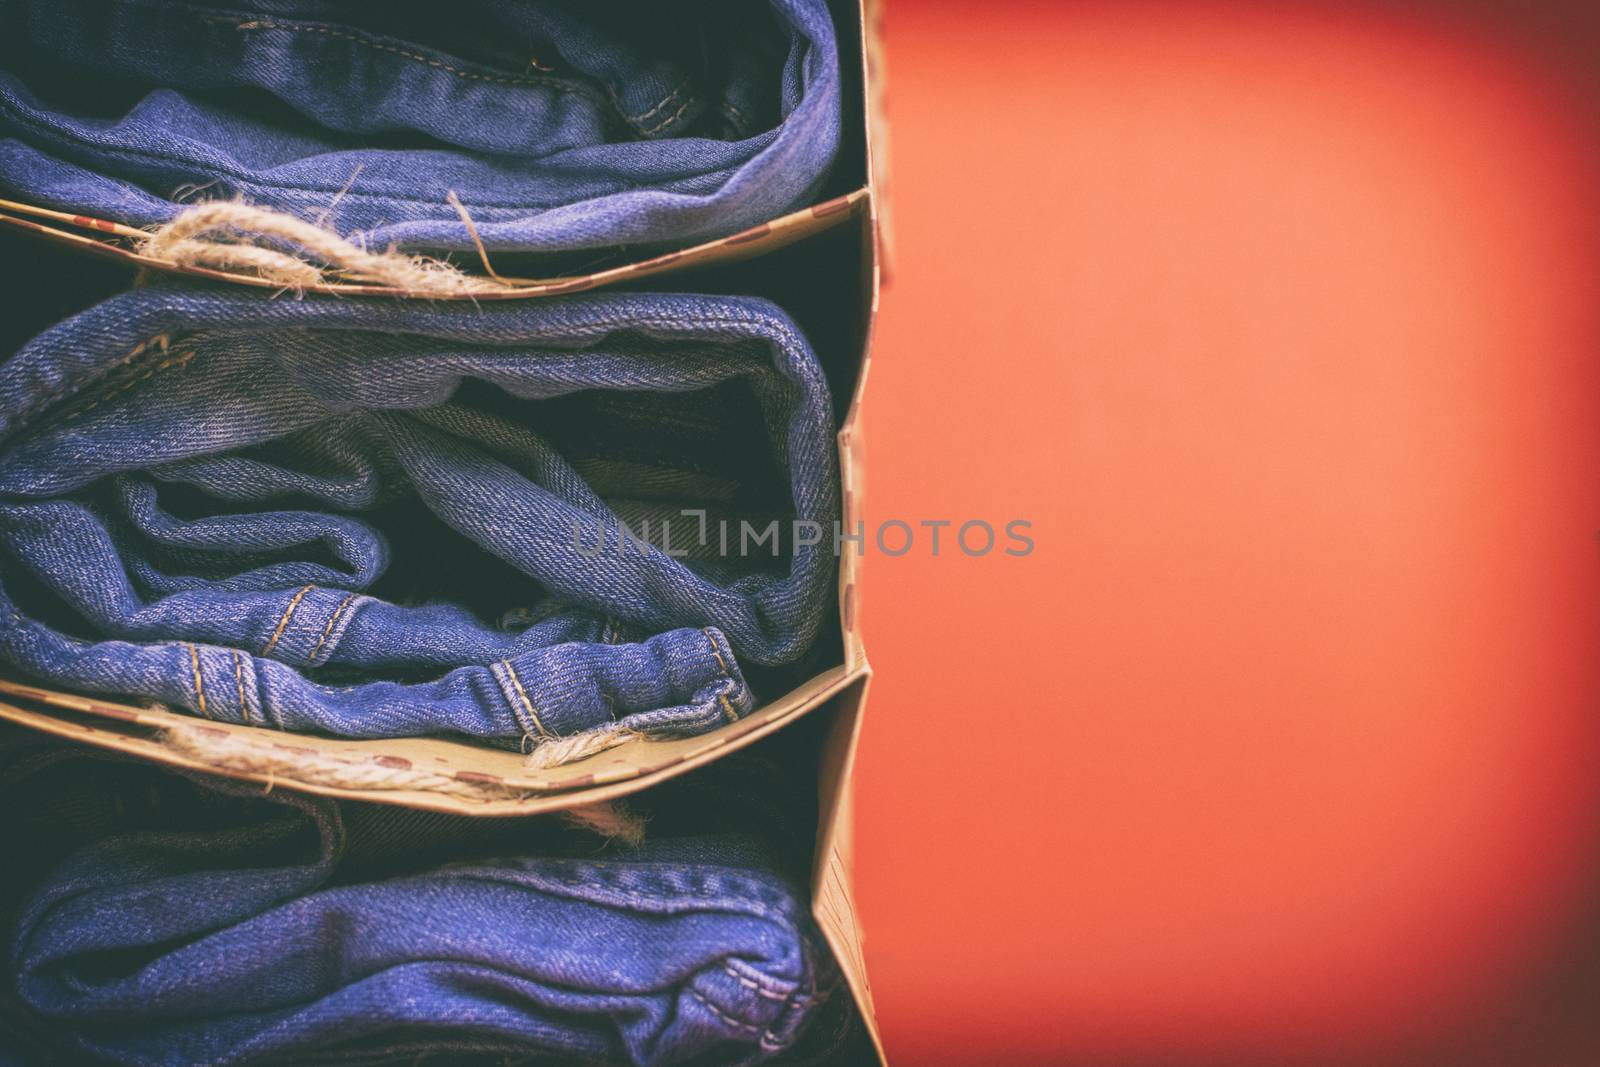 Women's jeans folded in a pile on a colored background. Made in a vintage performance.